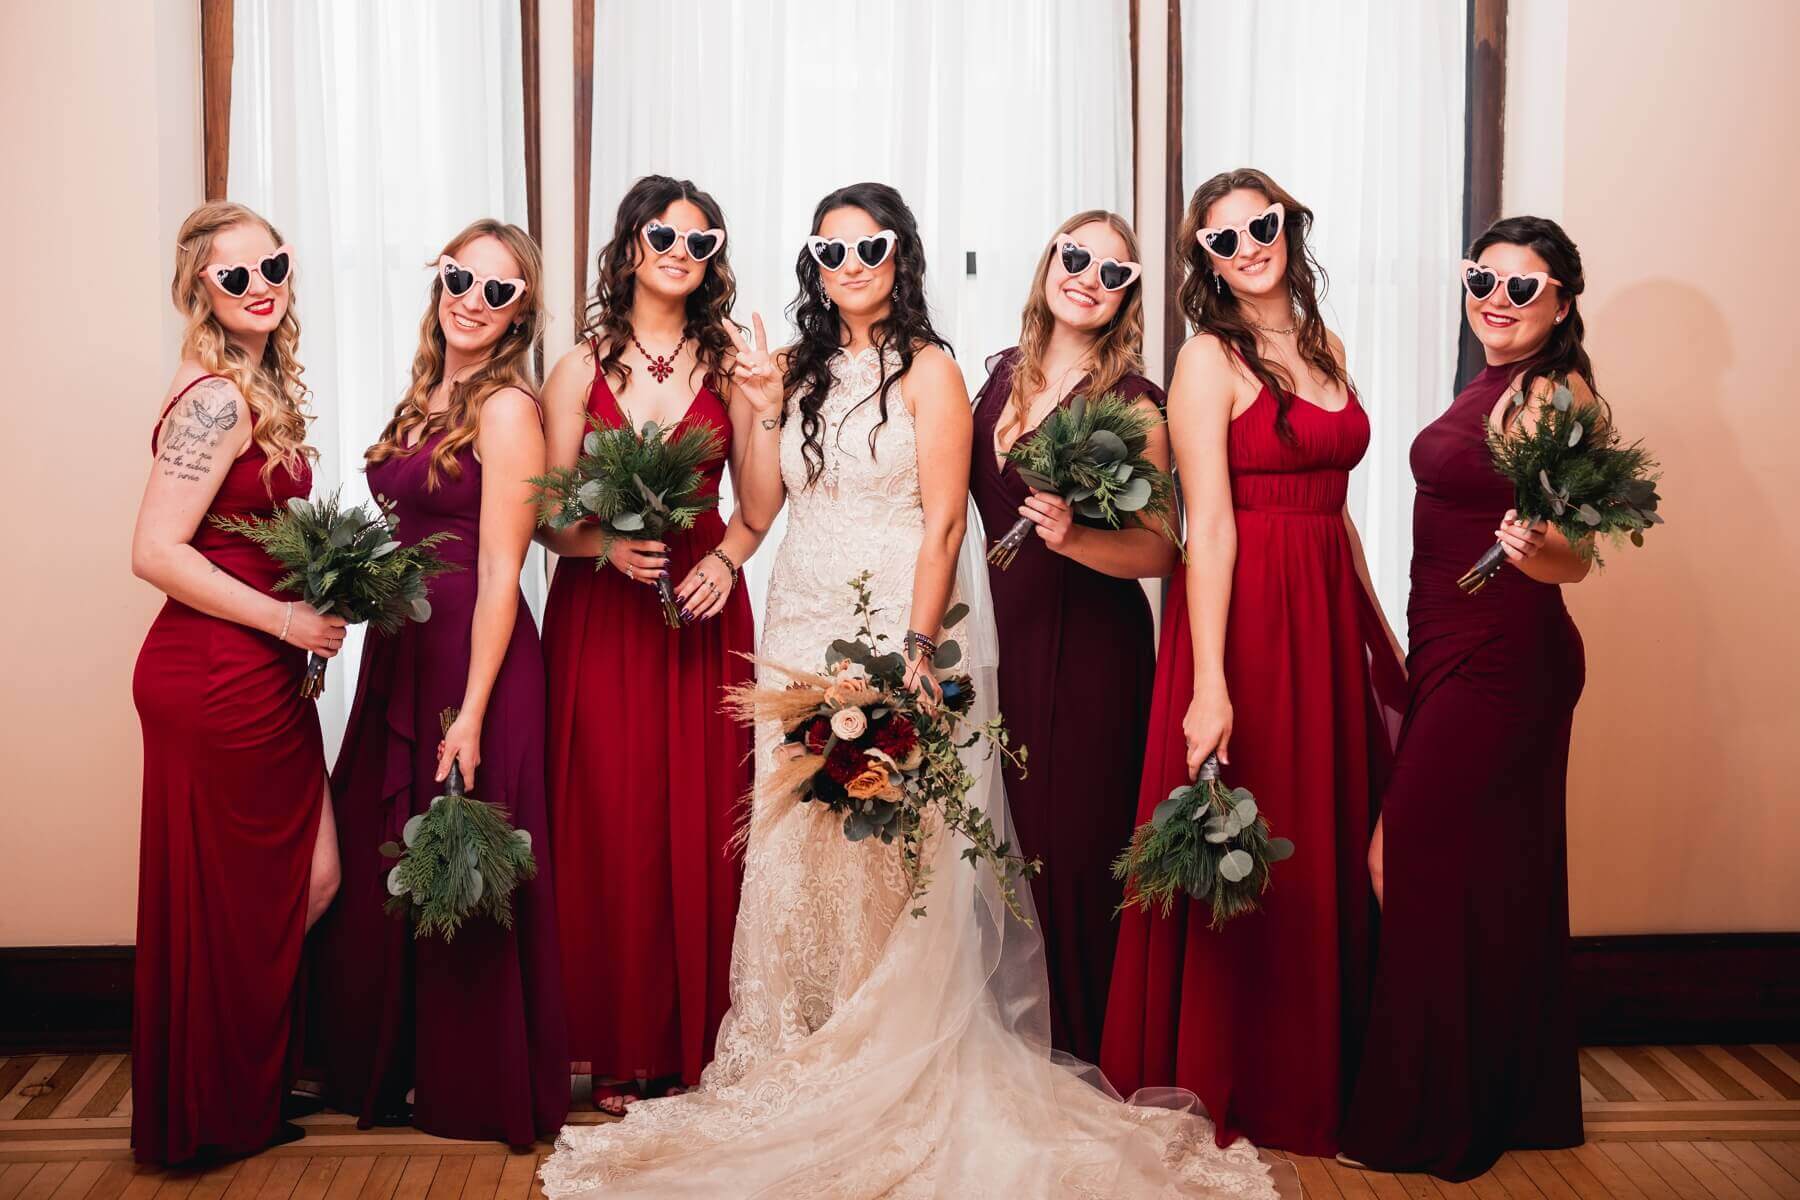 Bride and bridesmaids wearing heart sunglasses at wedding venue in Illinois